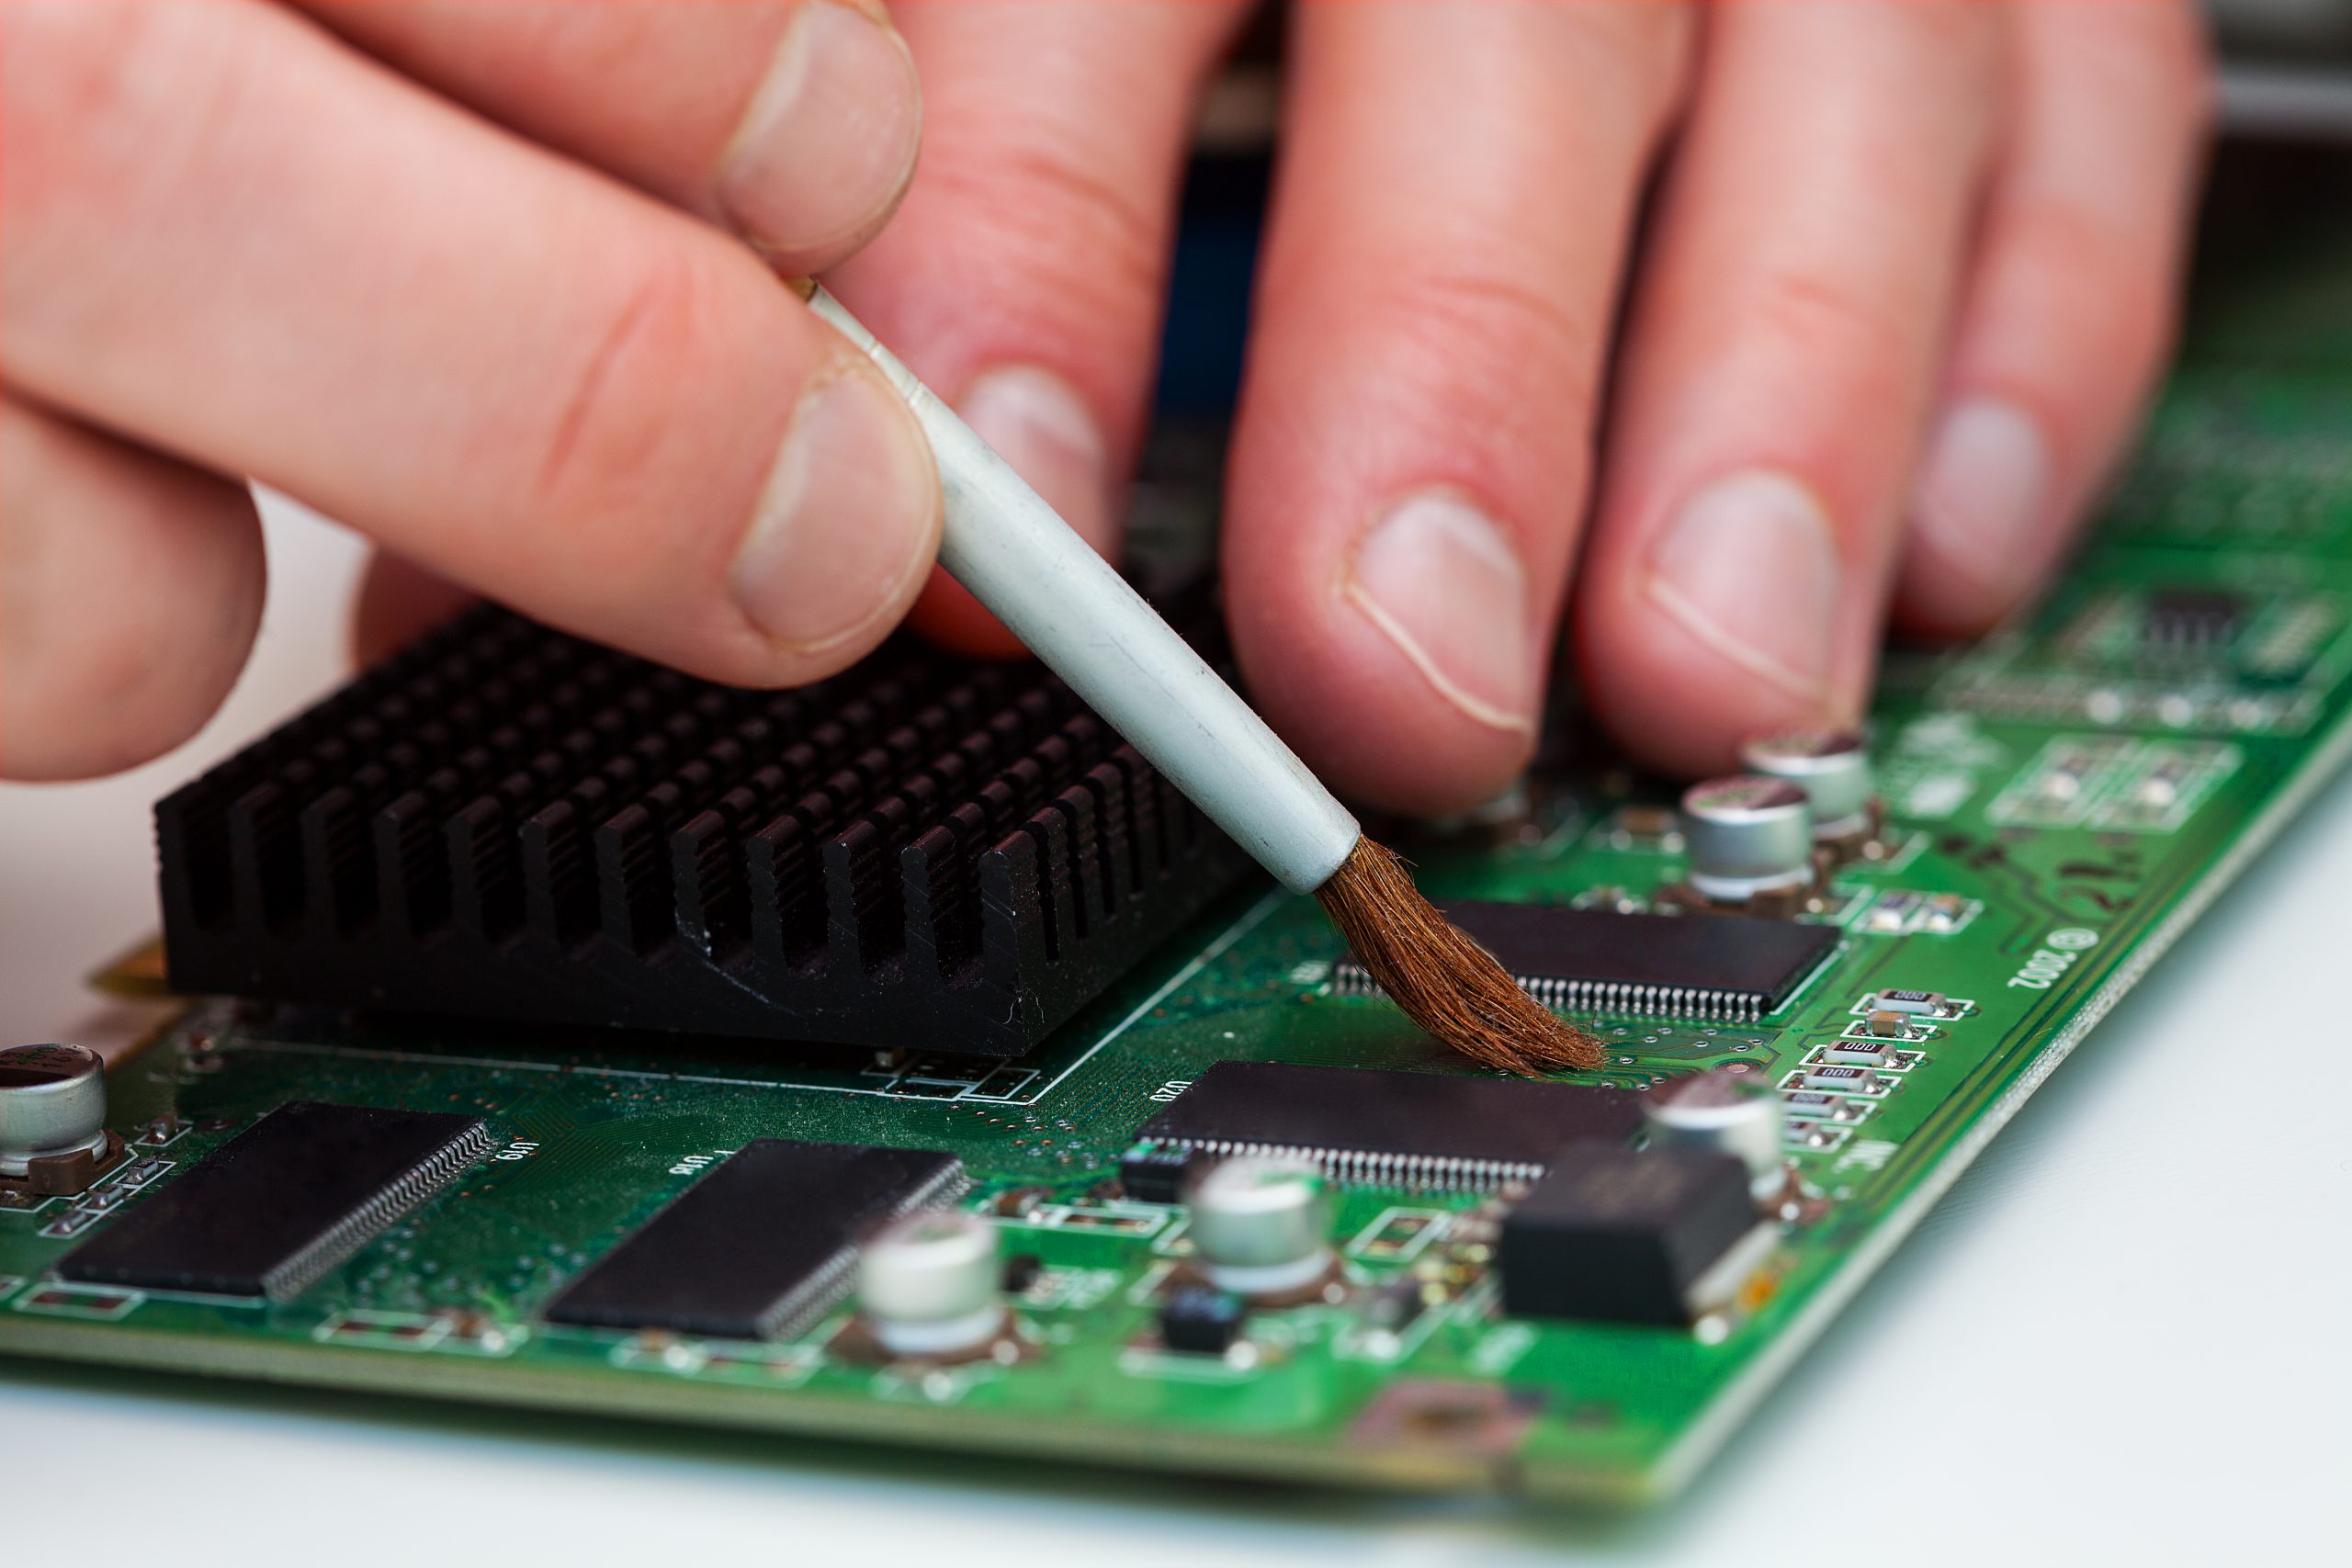 Application of conformal coating by brushing